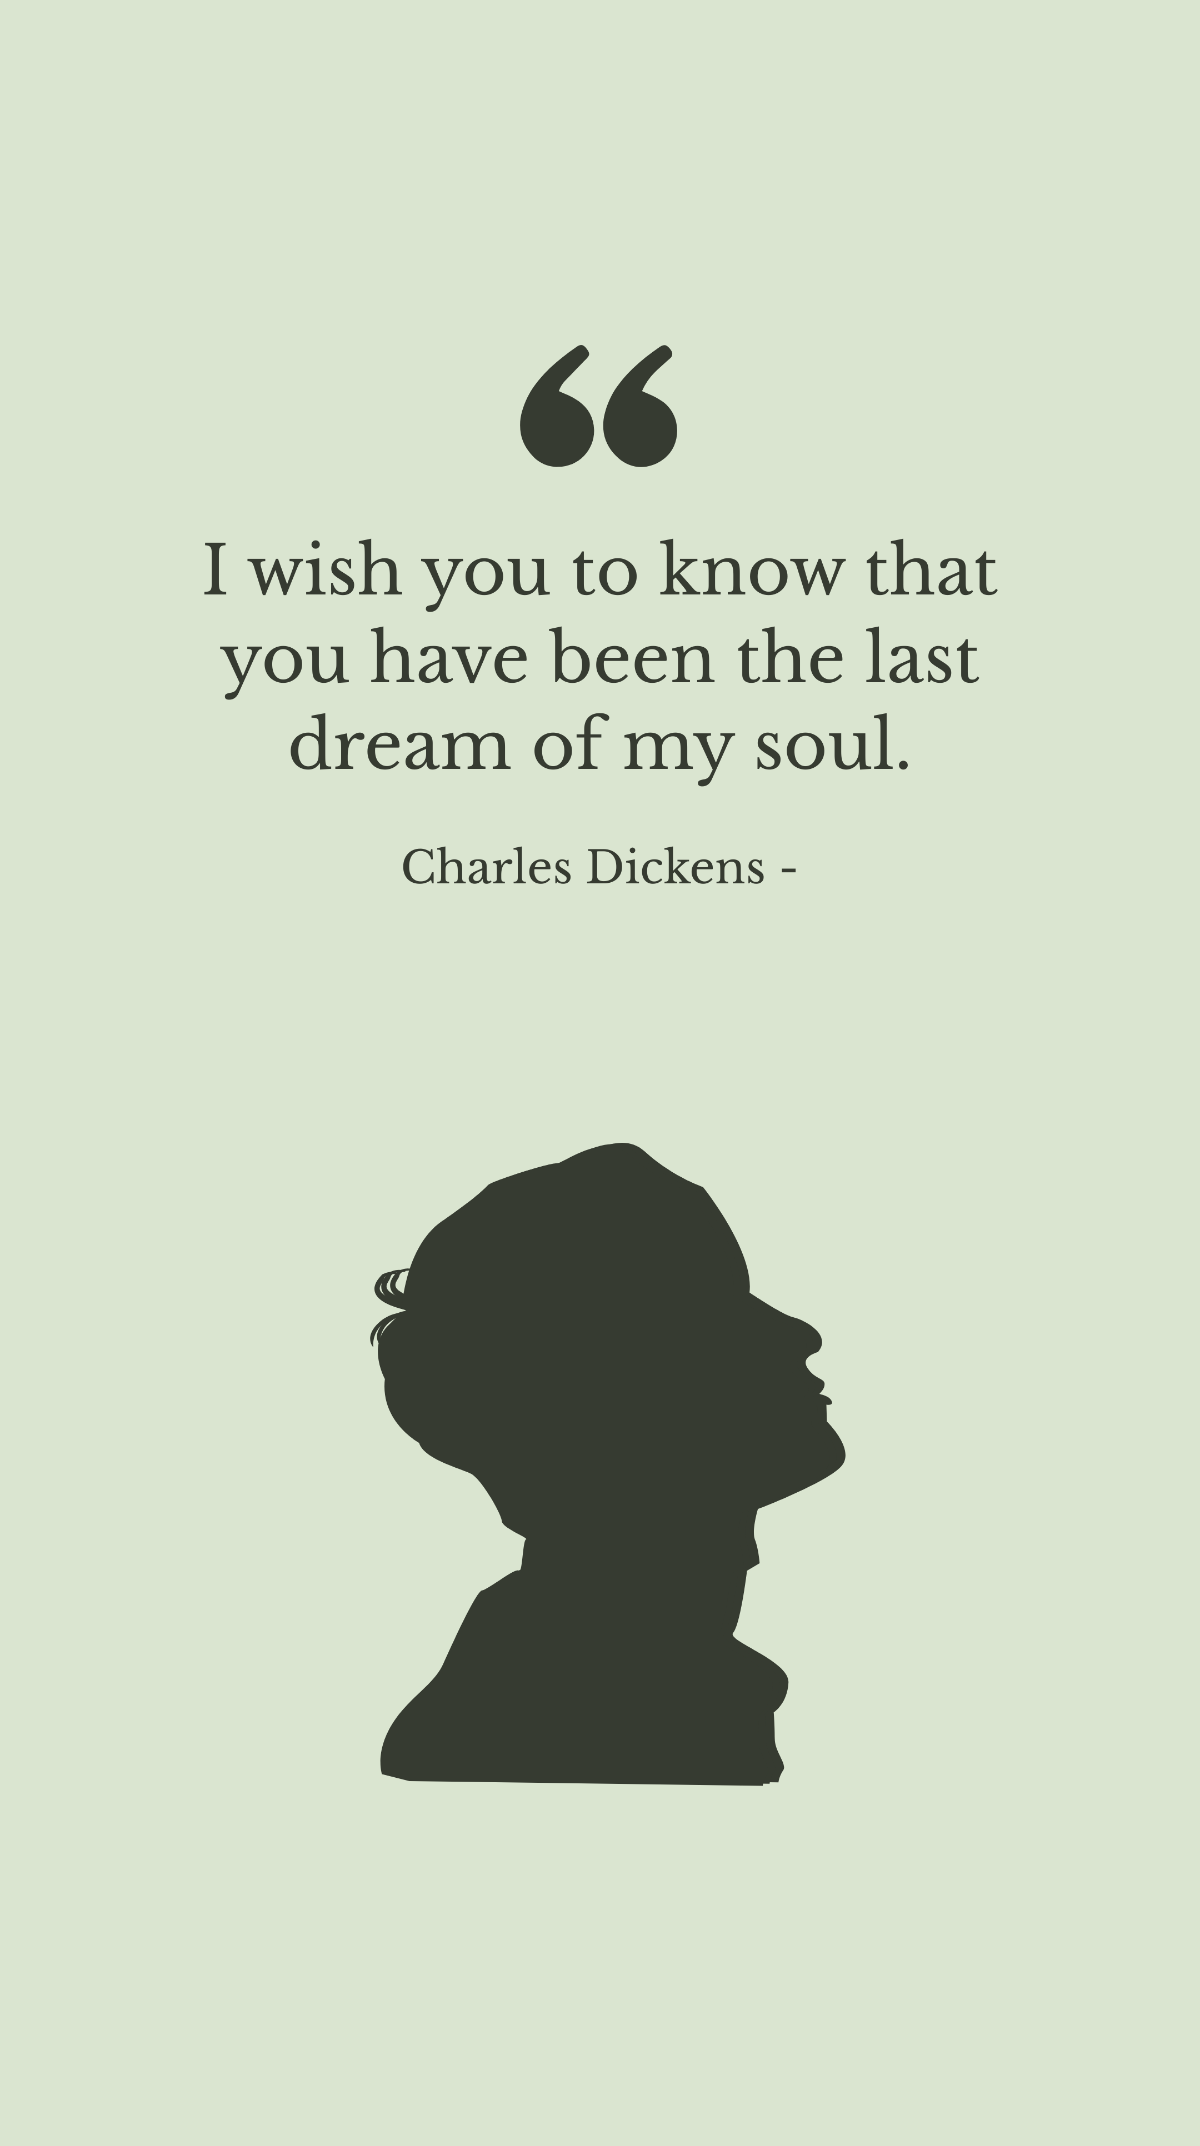 Charles Dickens - I wish you to know that you have been the last dream of my soul.